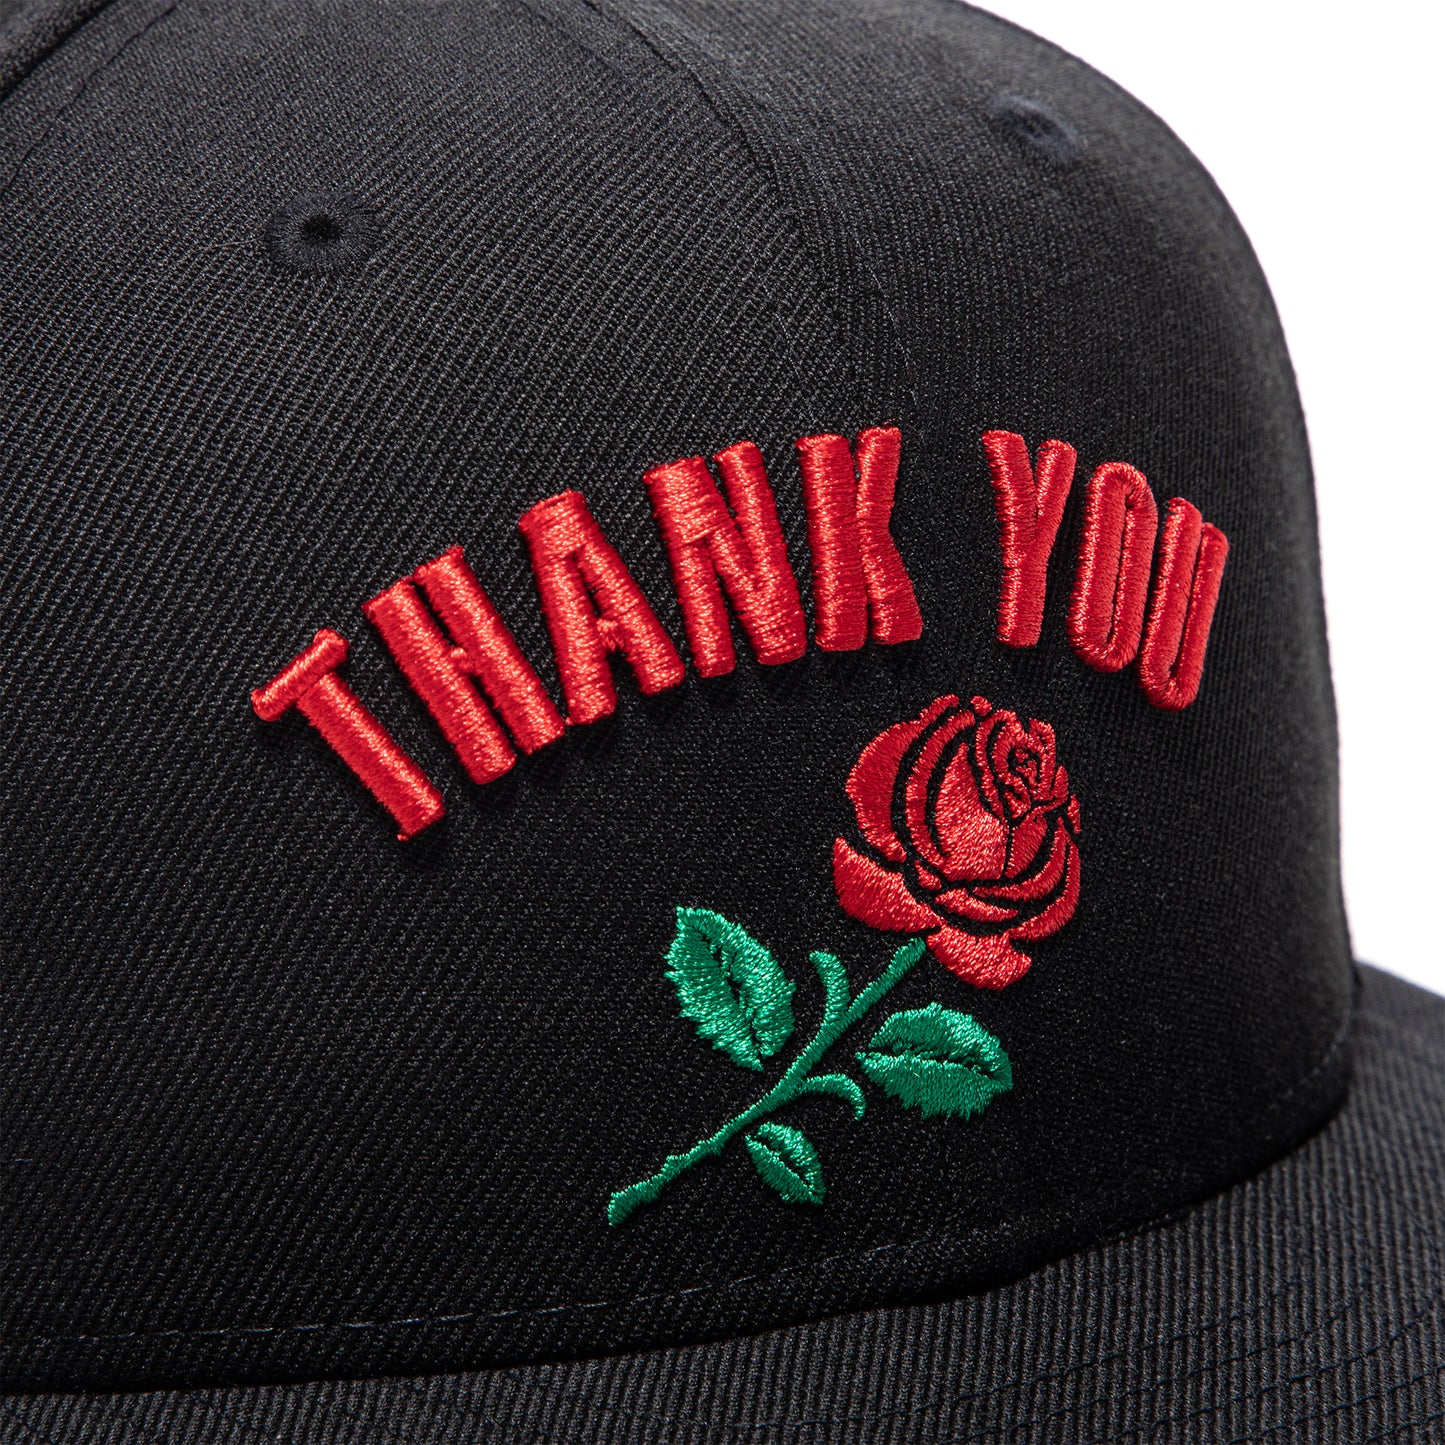 New Era Rose Thank You Fitted Cap (Black/Red)